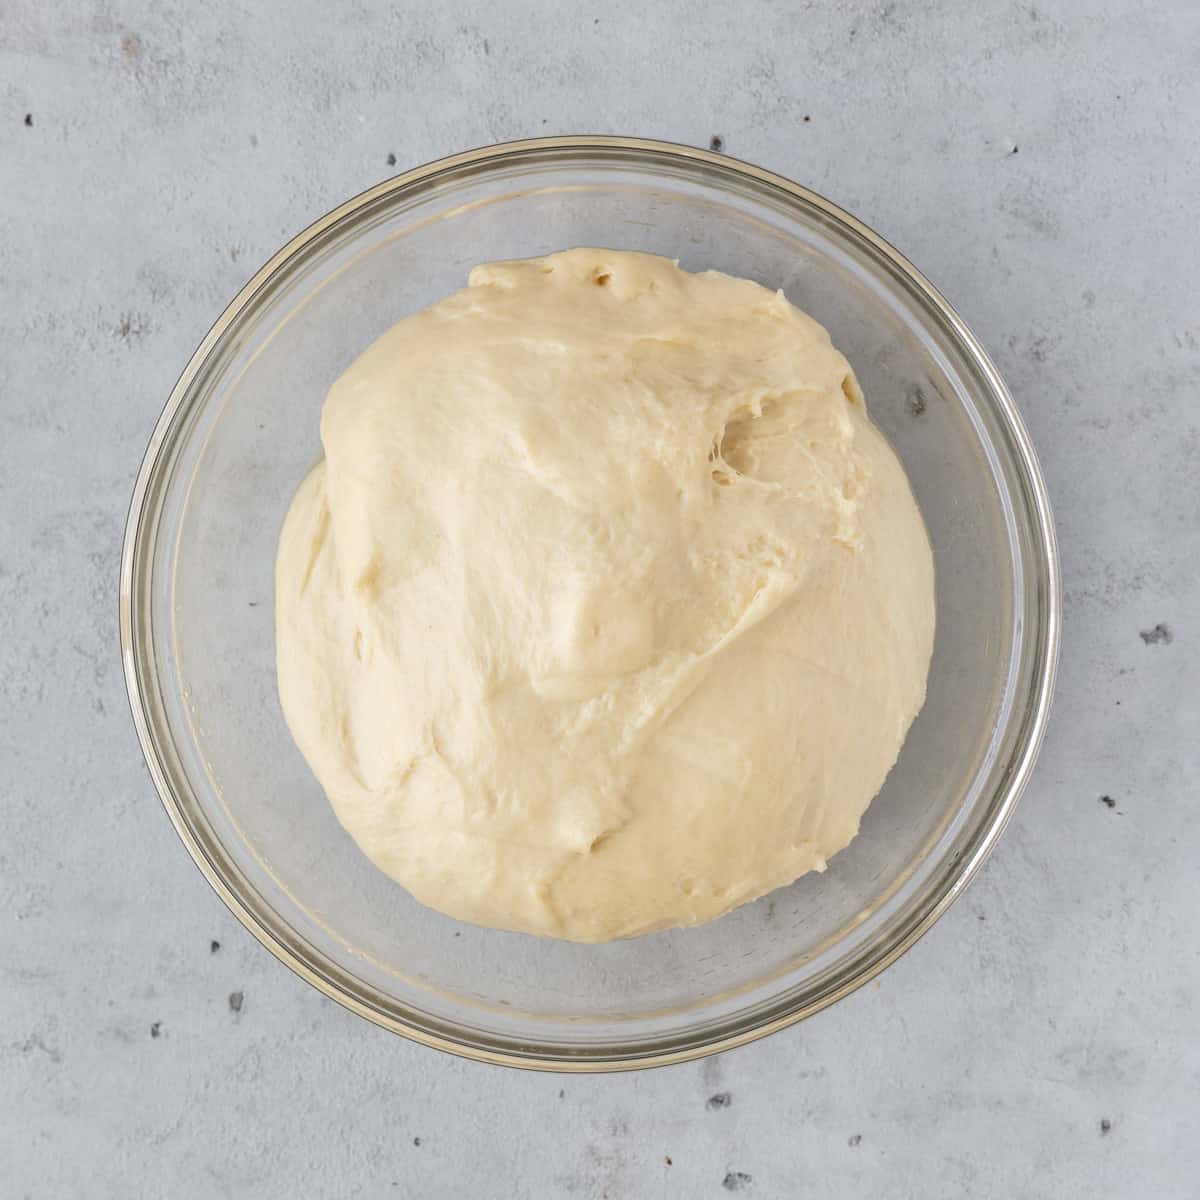 the risen dough in a glass bowl on a grey background